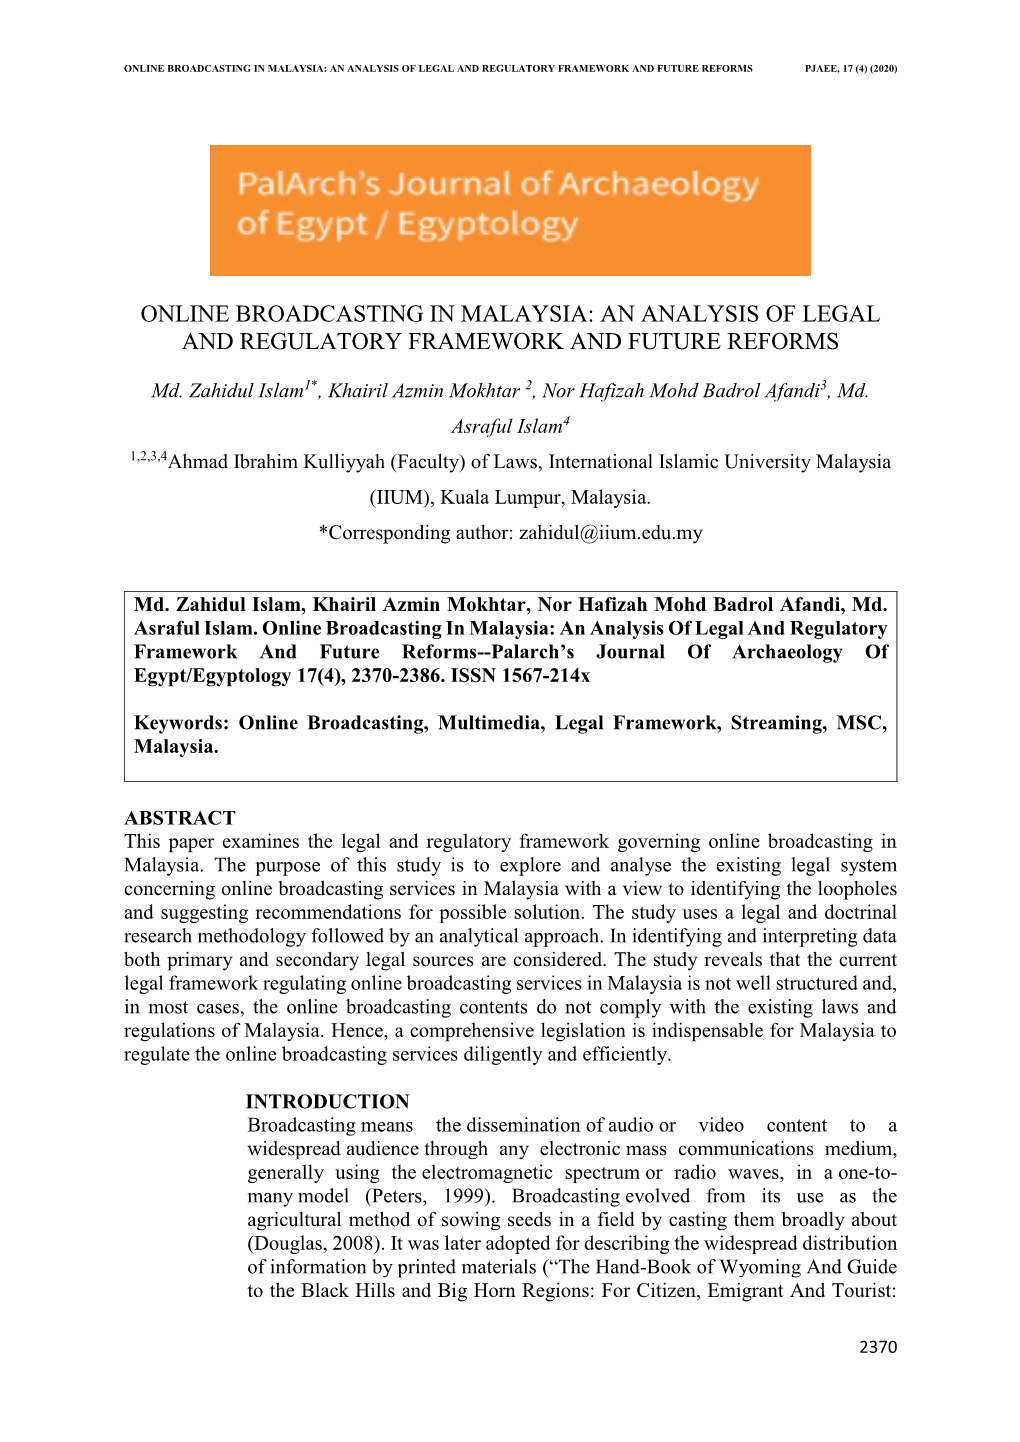 Online Broadcasting in Malaysia: an Analysis of Legal and Regulatory Framework and Future Reforms Pjaee, 17 (4) (2020)